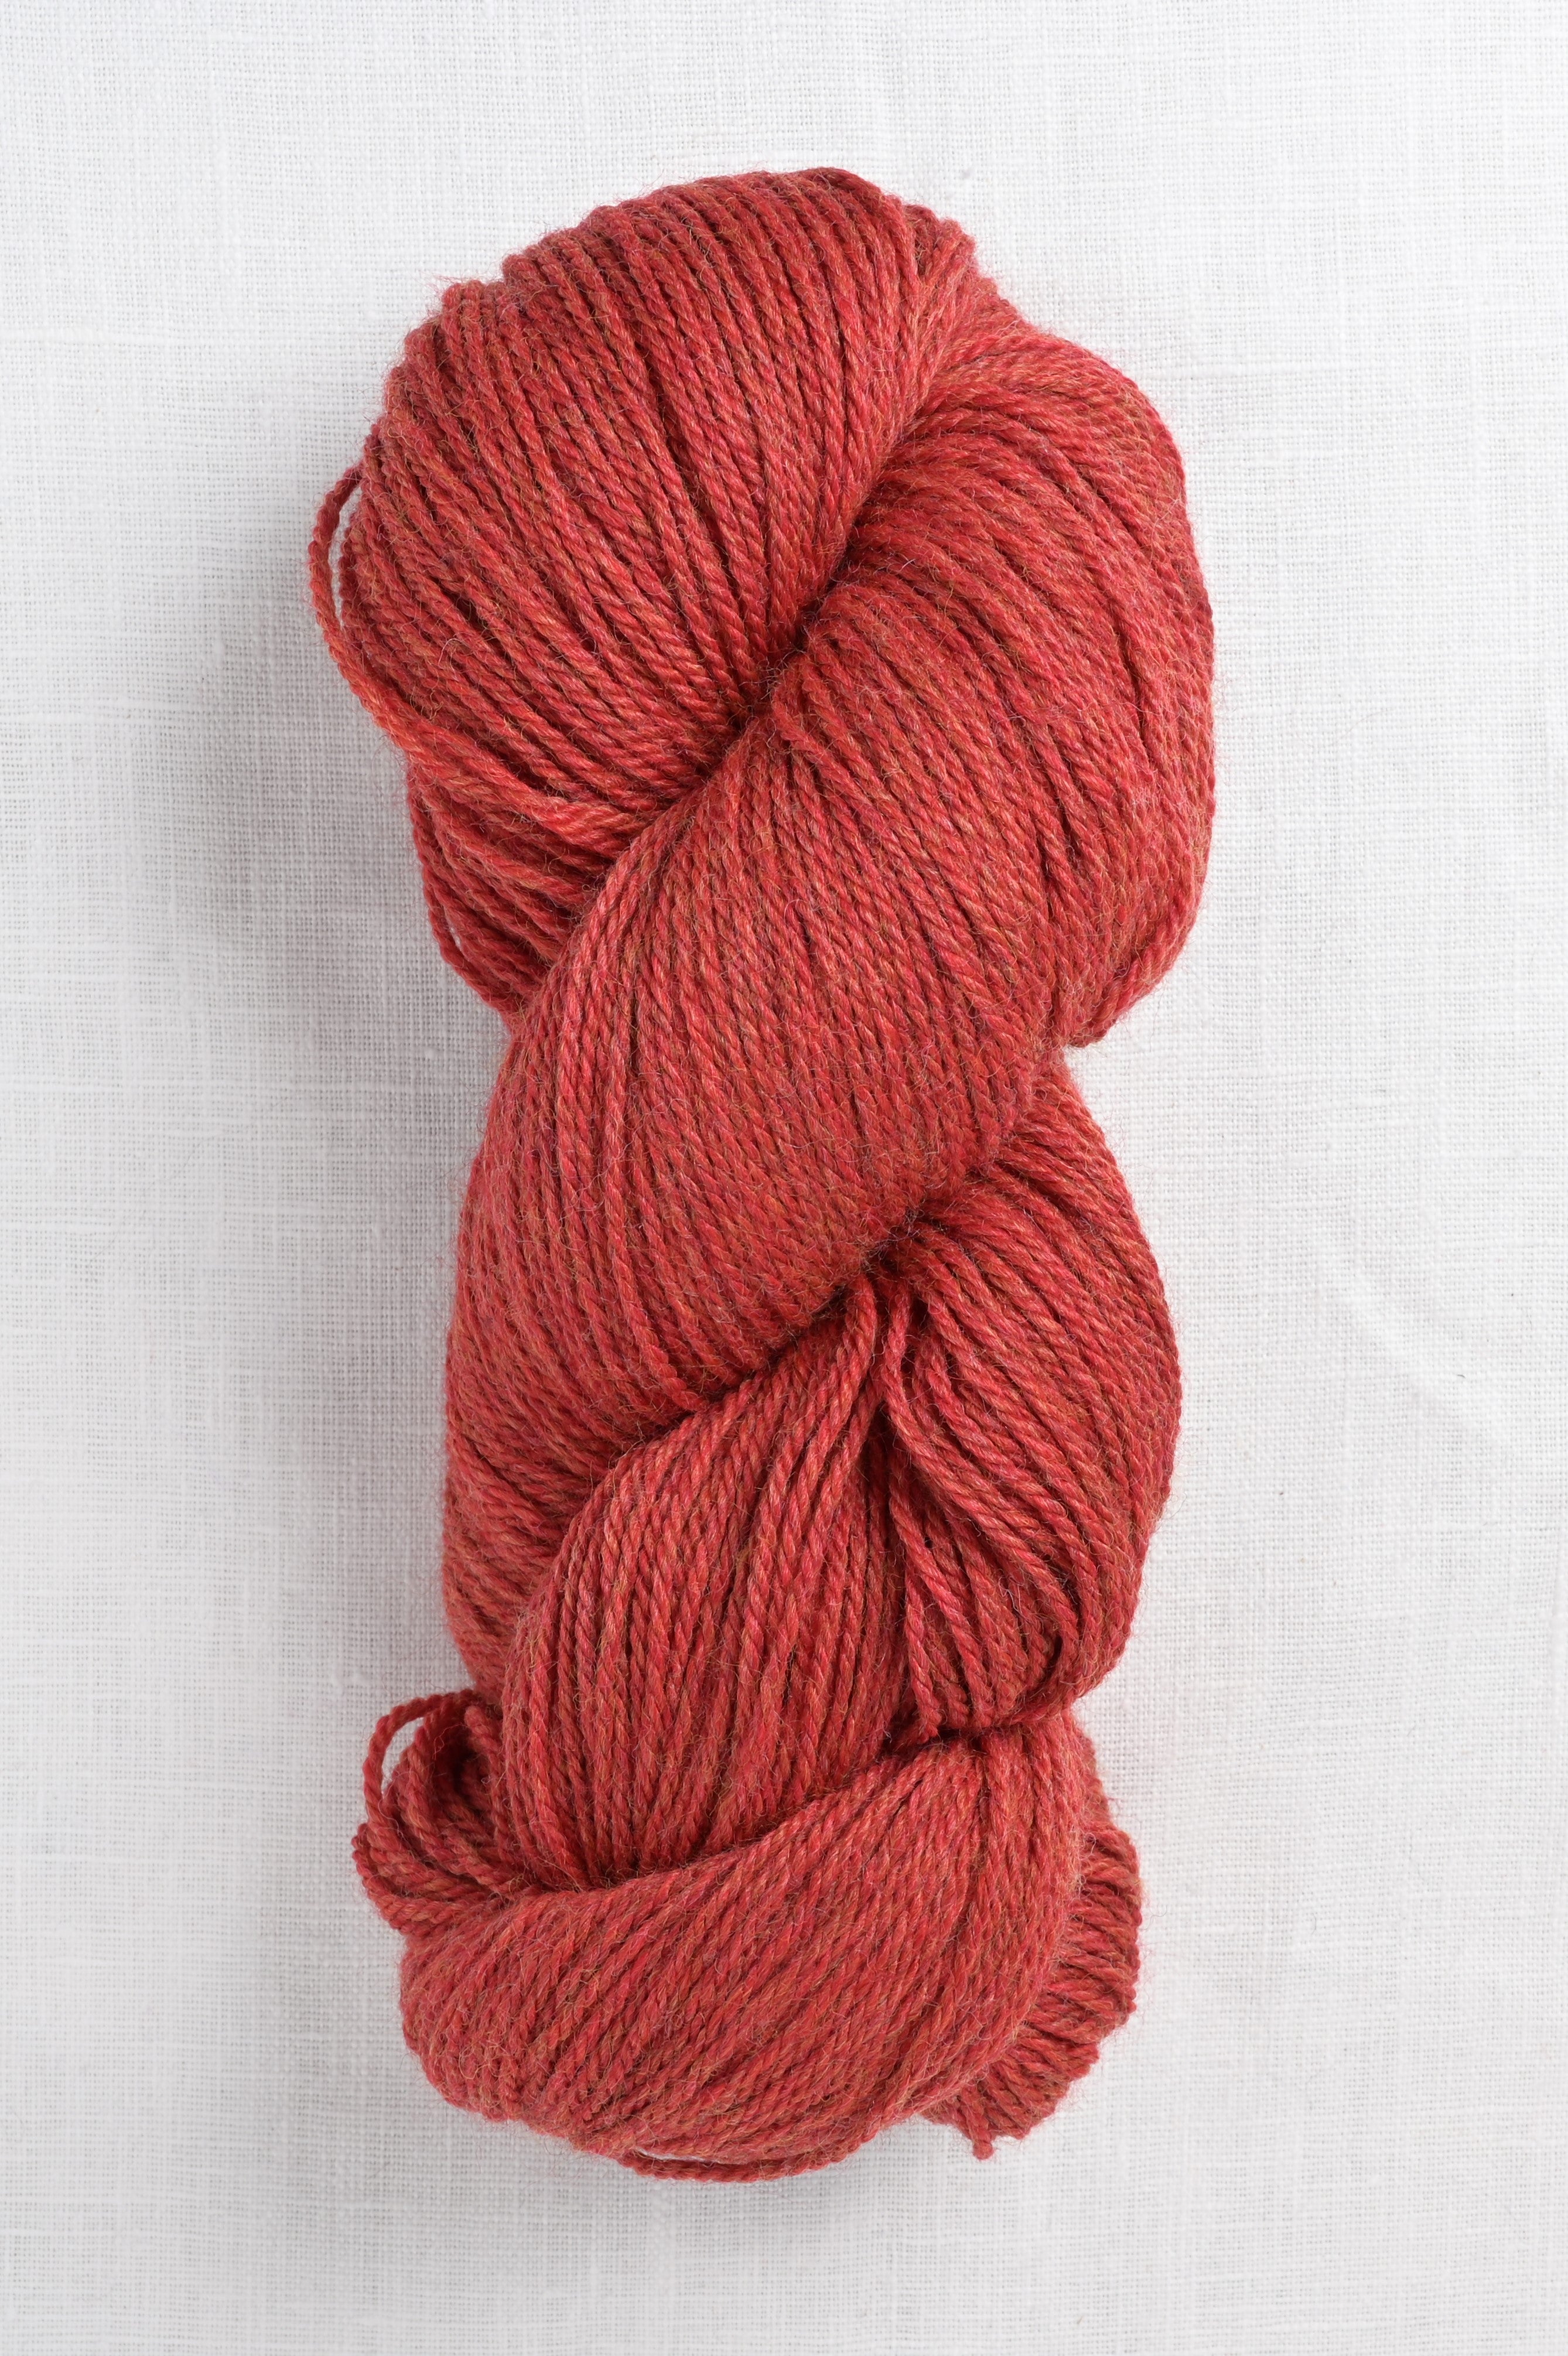 2173 DK Berroco Vintage – Red Company Pepper and Wool